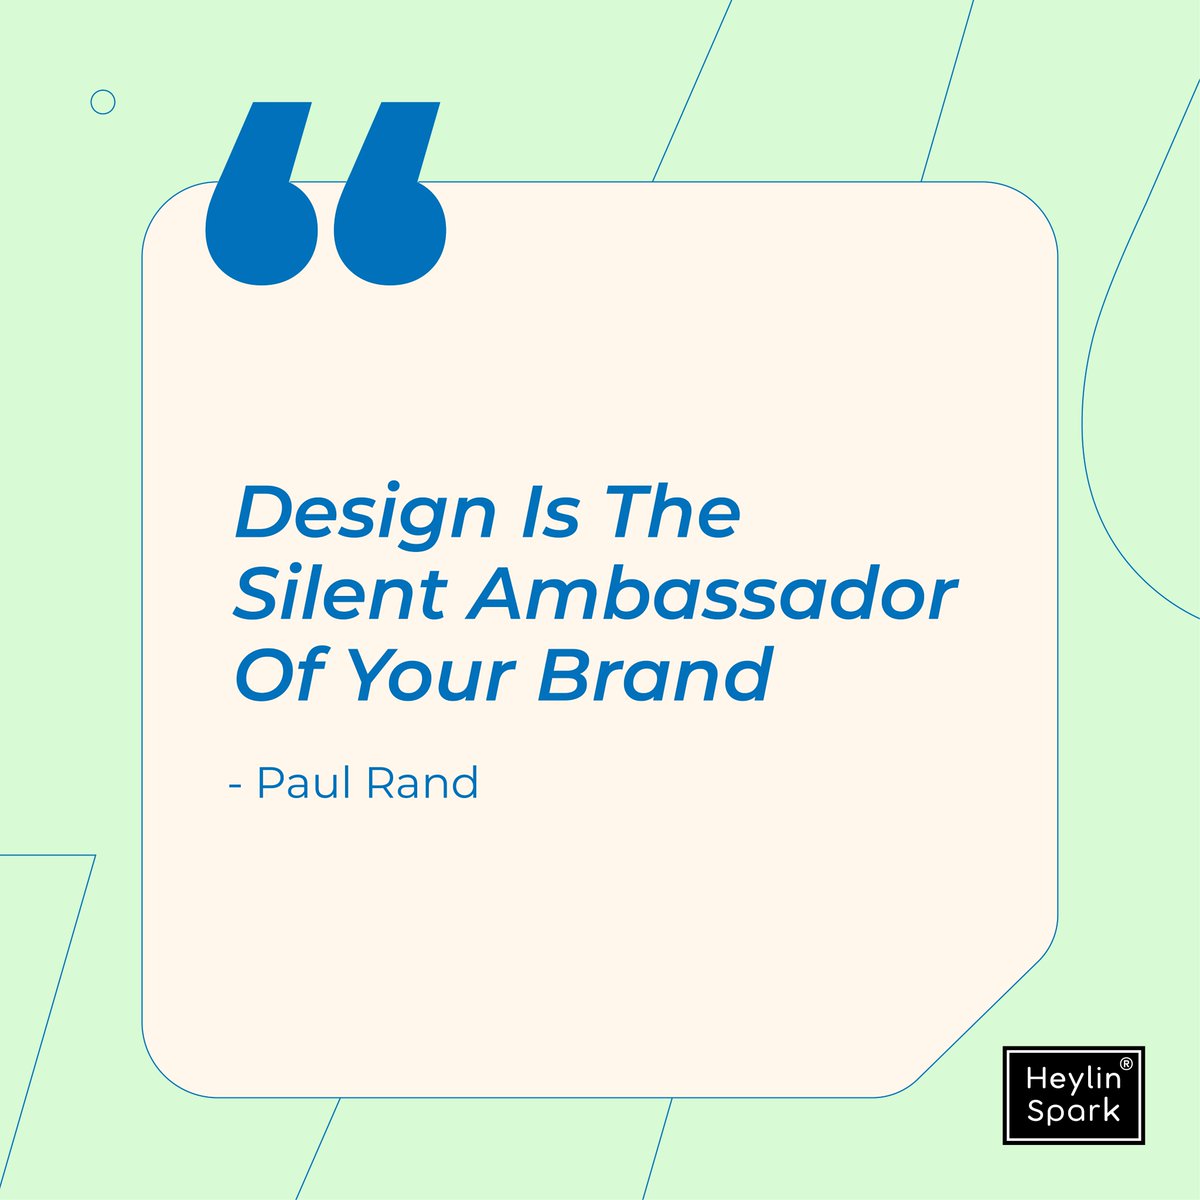 Remember, design is the key that unlocks endless possibilities, allowing your brand's essence to shine brightly in the vast cosmos of imagination. 💯

#heylinspark #pr #marketing #marketingagency #marketingstrategy #agencylife #design #quote #paulrand #brand #informative